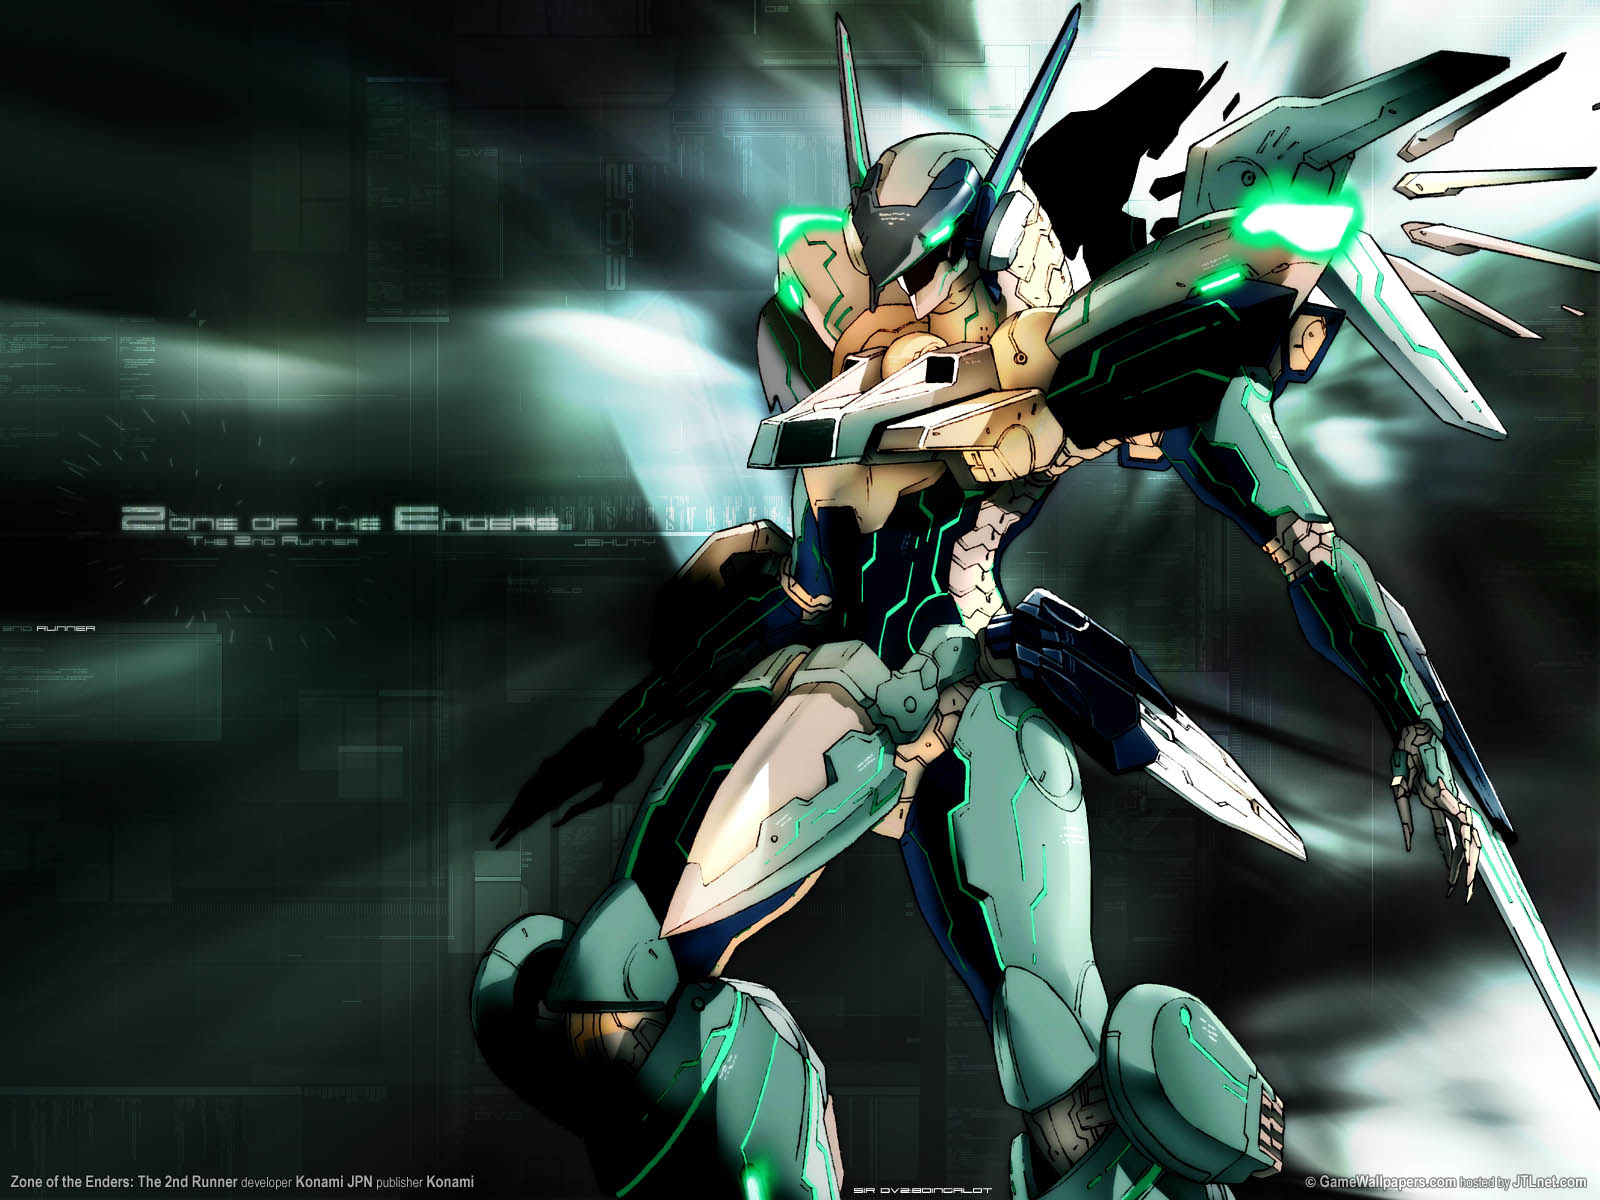 Zone Of The Enders: The 2nd Runner Backgrounds, Compatible - PC, Mobile, Gadgets| 1600x1200 px